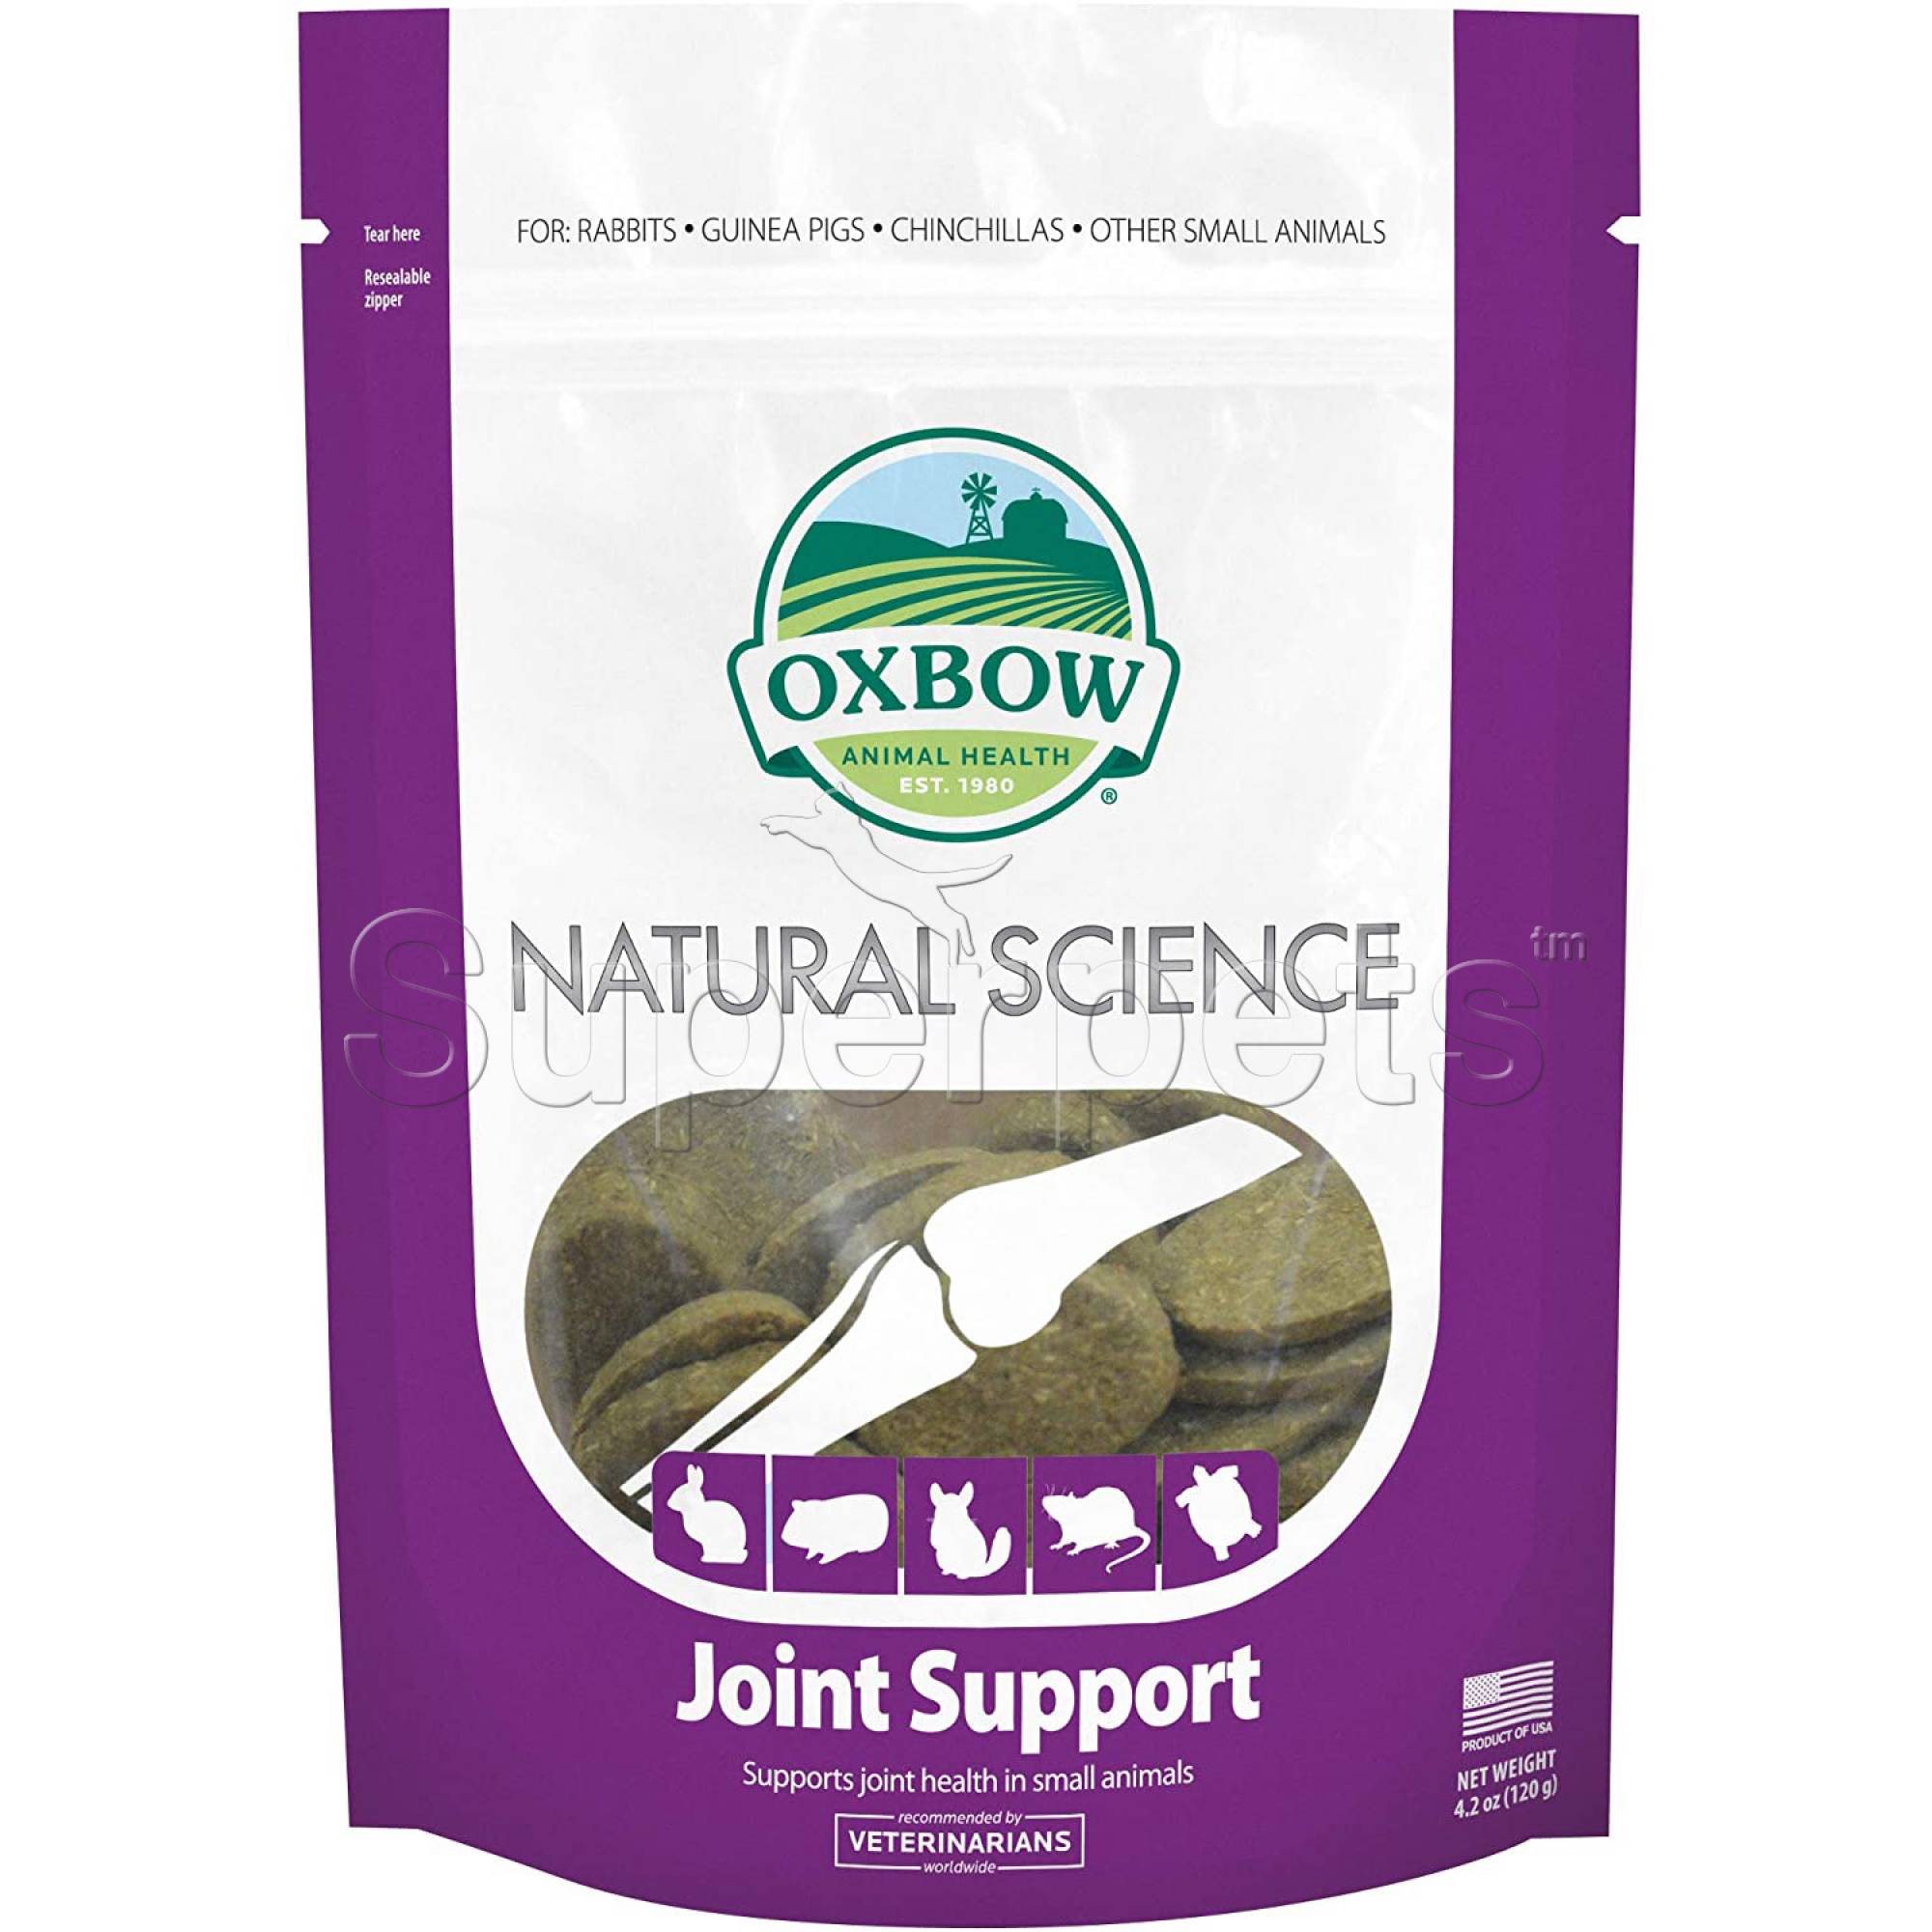 Oxbow Natural Science Joint Support 4.2oz (120g)